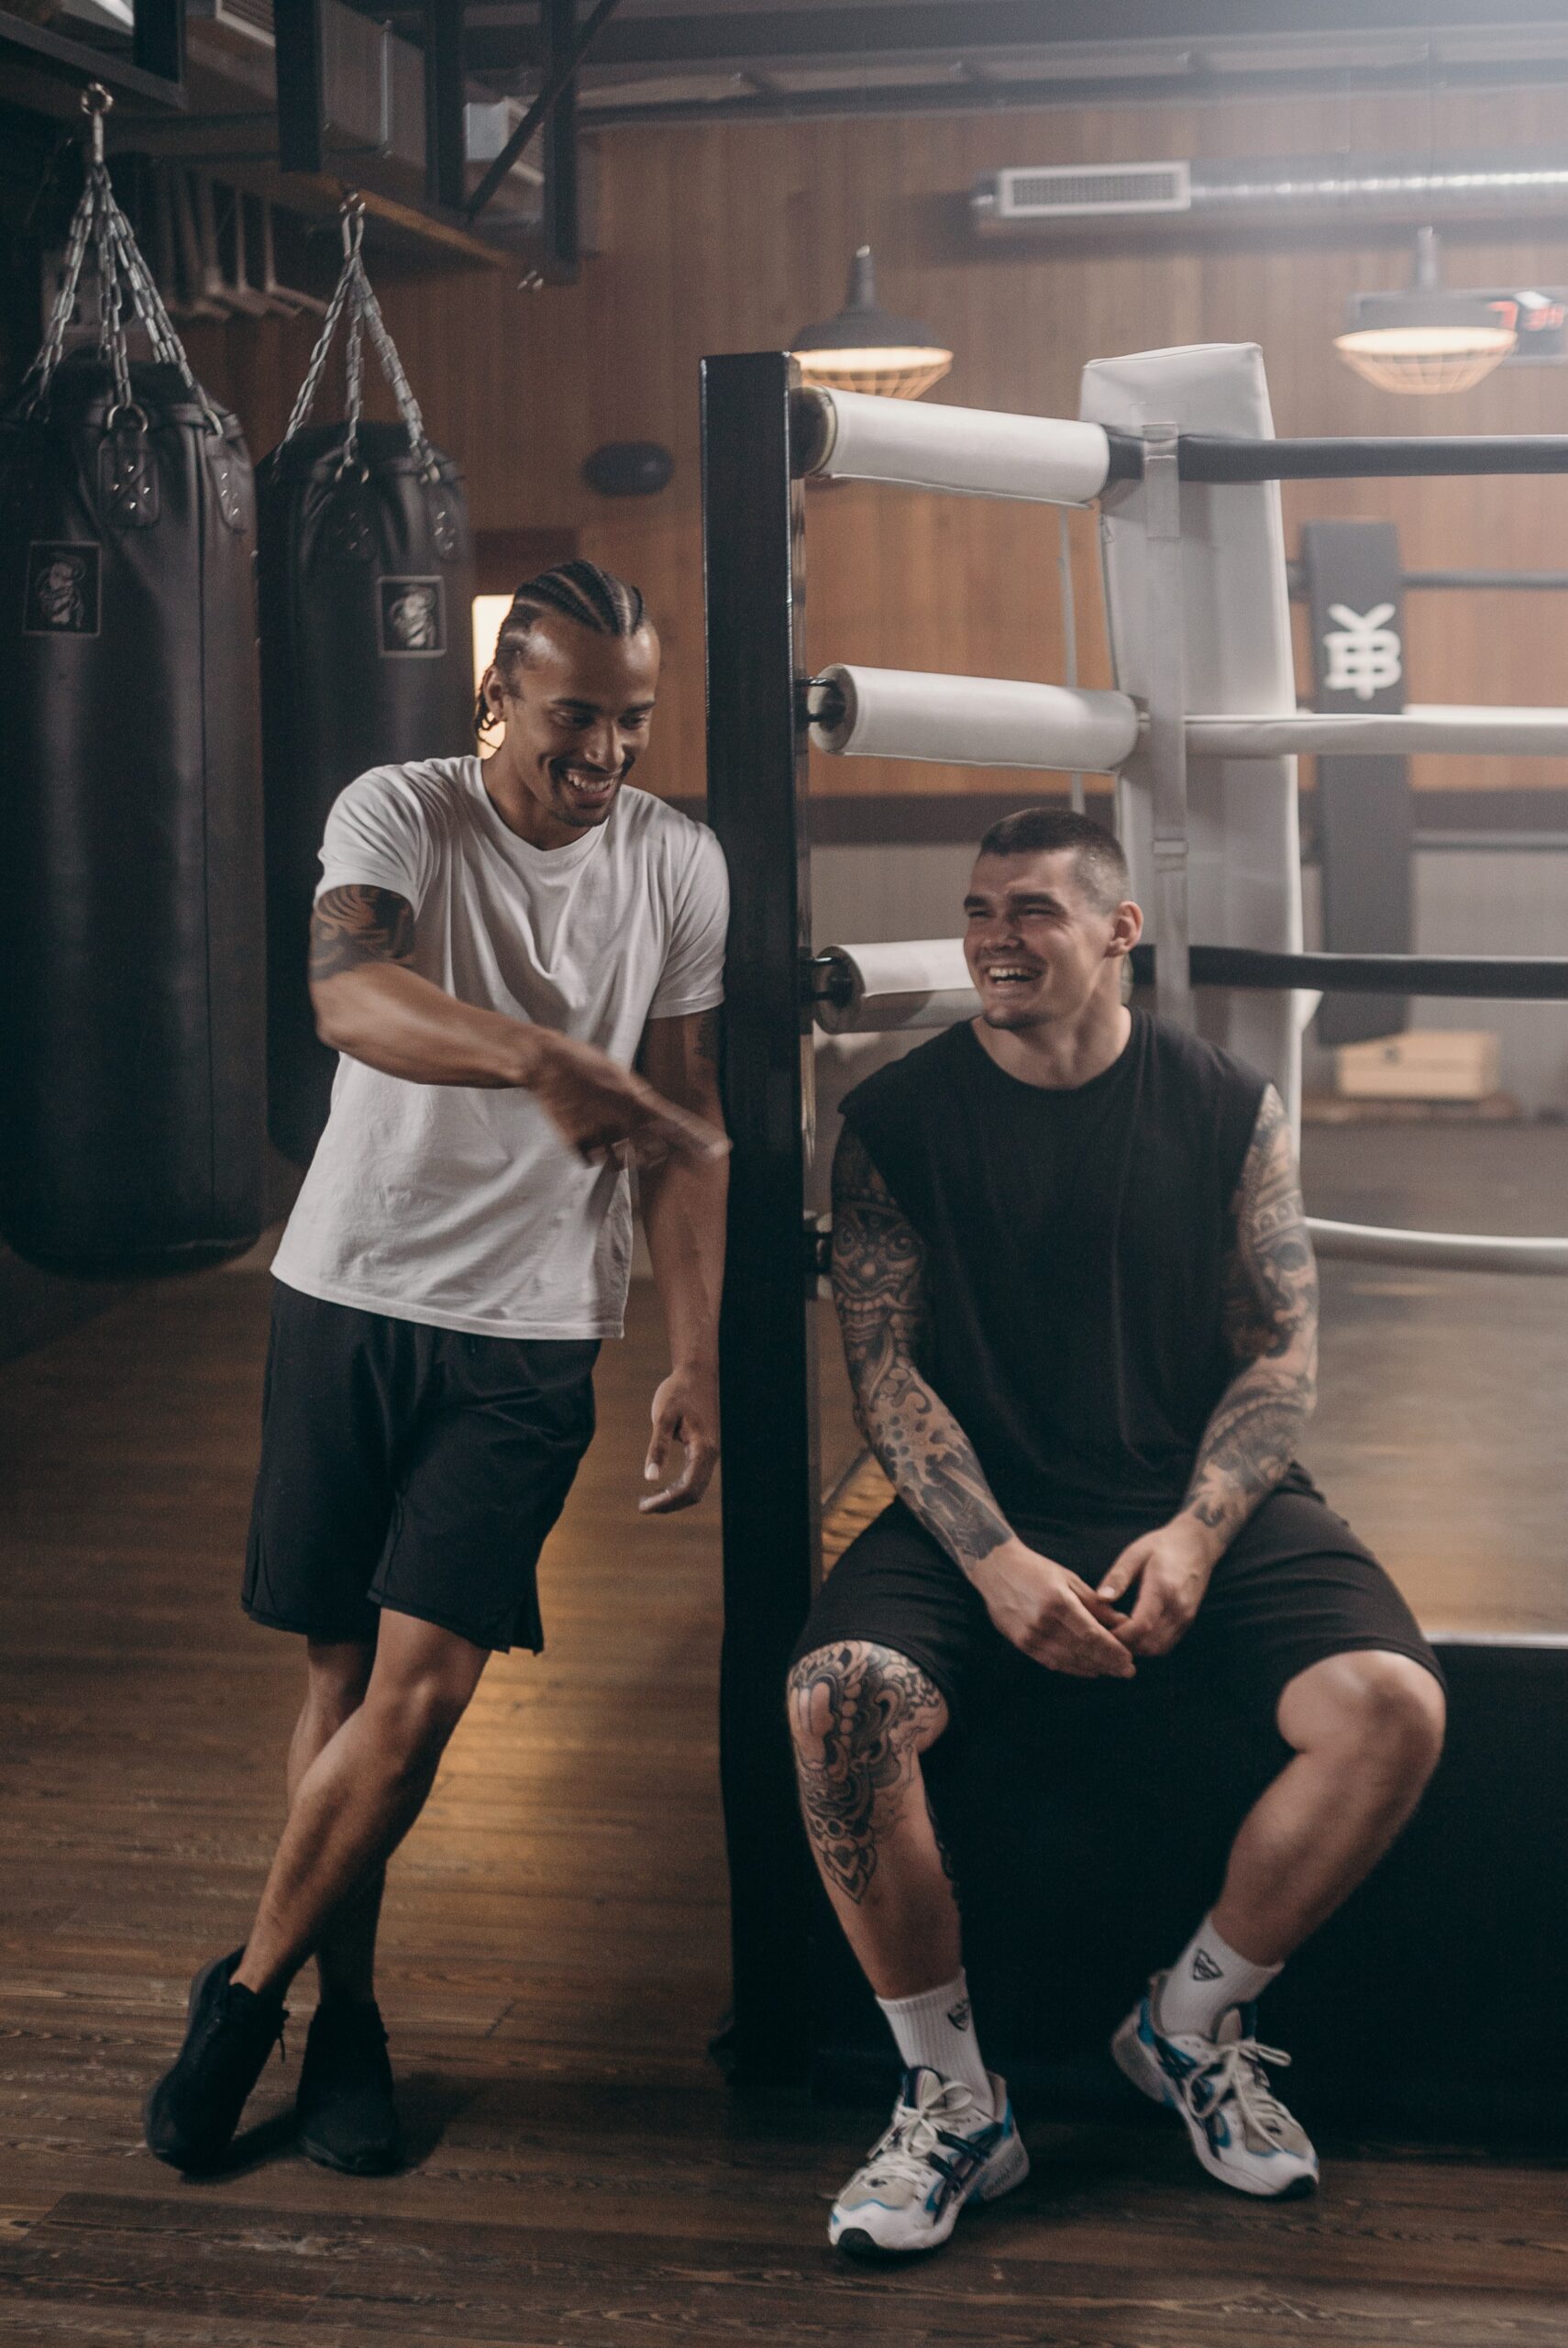 Men smiling and having a conversation in a boxing ring